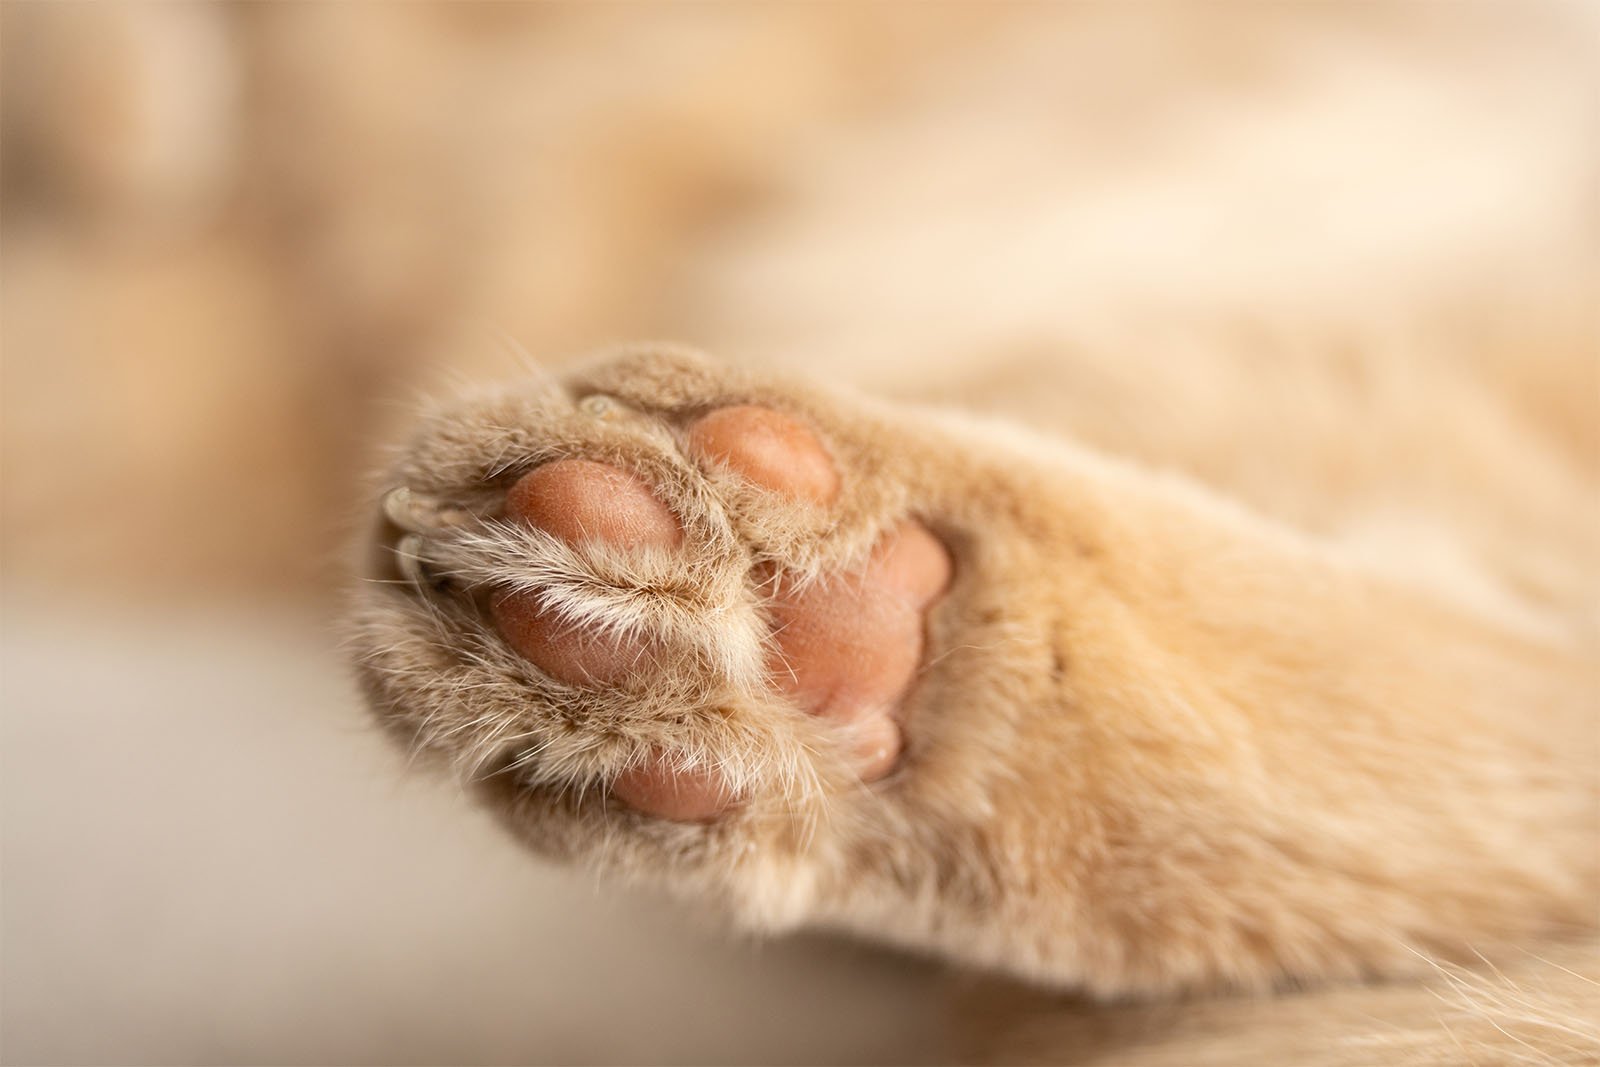 Close-up of a cat's paw with soft orange fur and pink paw pads. The image focuses on the paw, displaying the furry details and the subtle texture of the pads, giving a sense of coziness and warmth. The background is blurred and neutral.